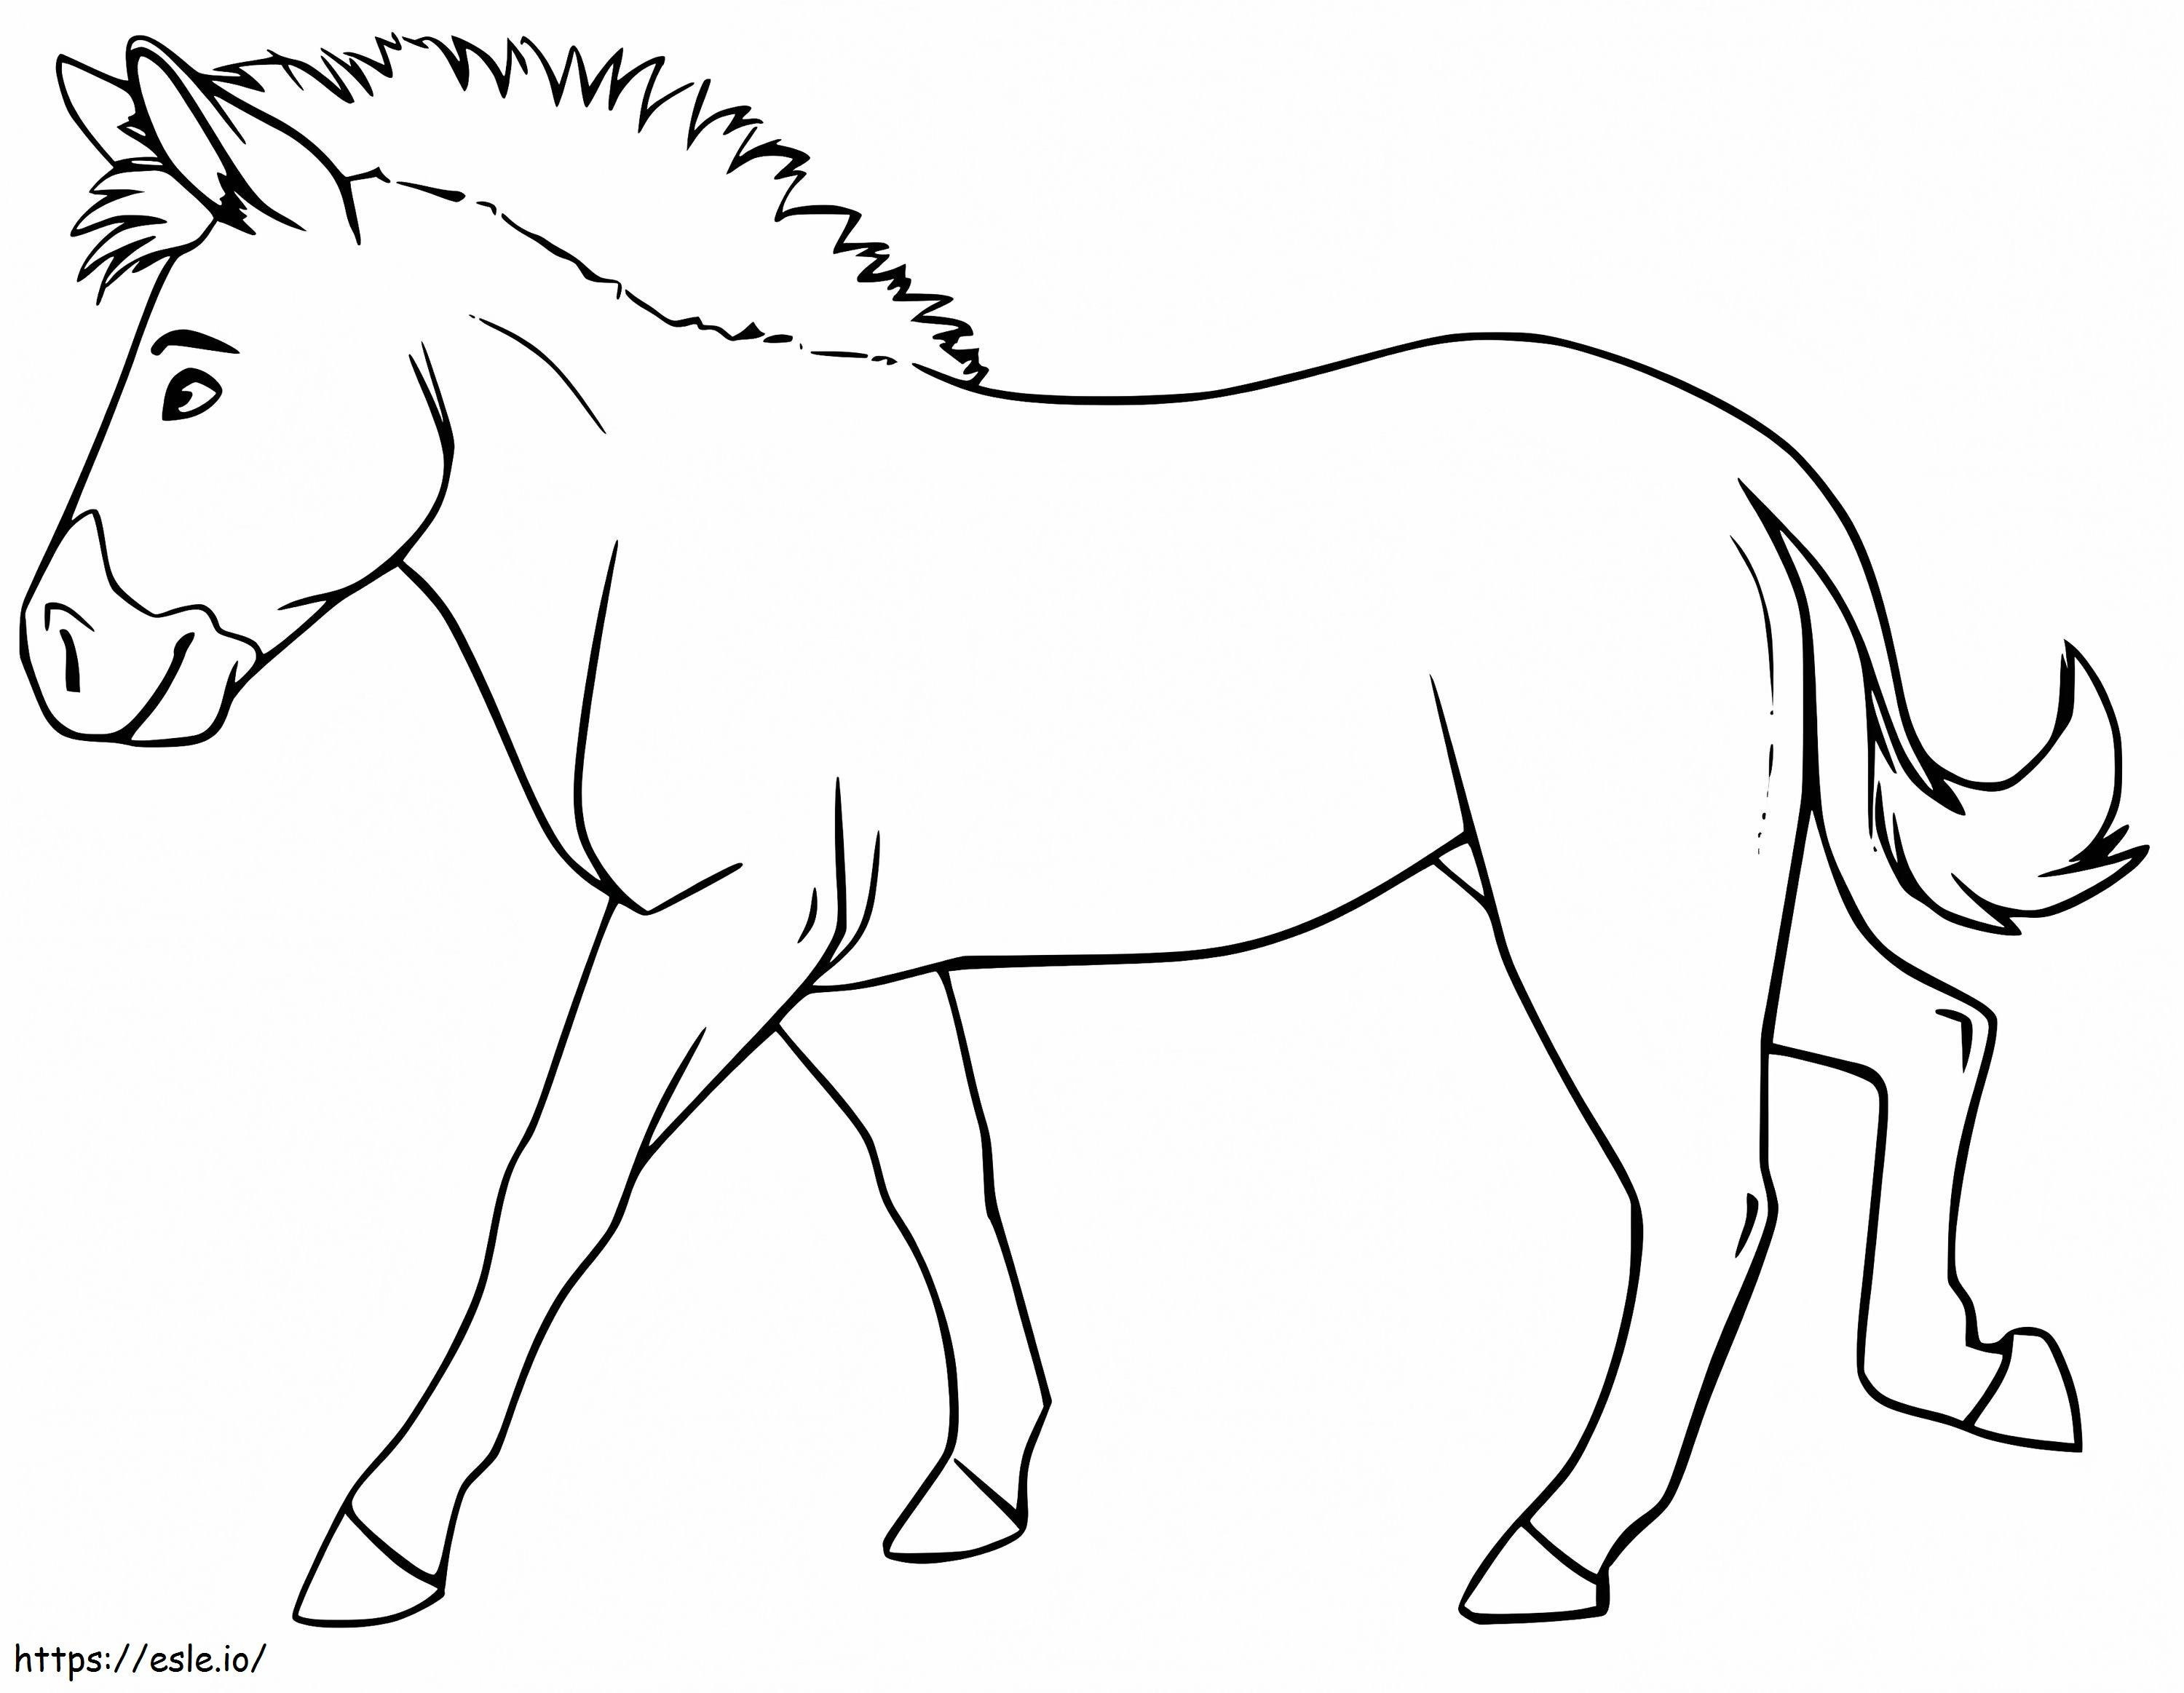 Normal Mule coloring page